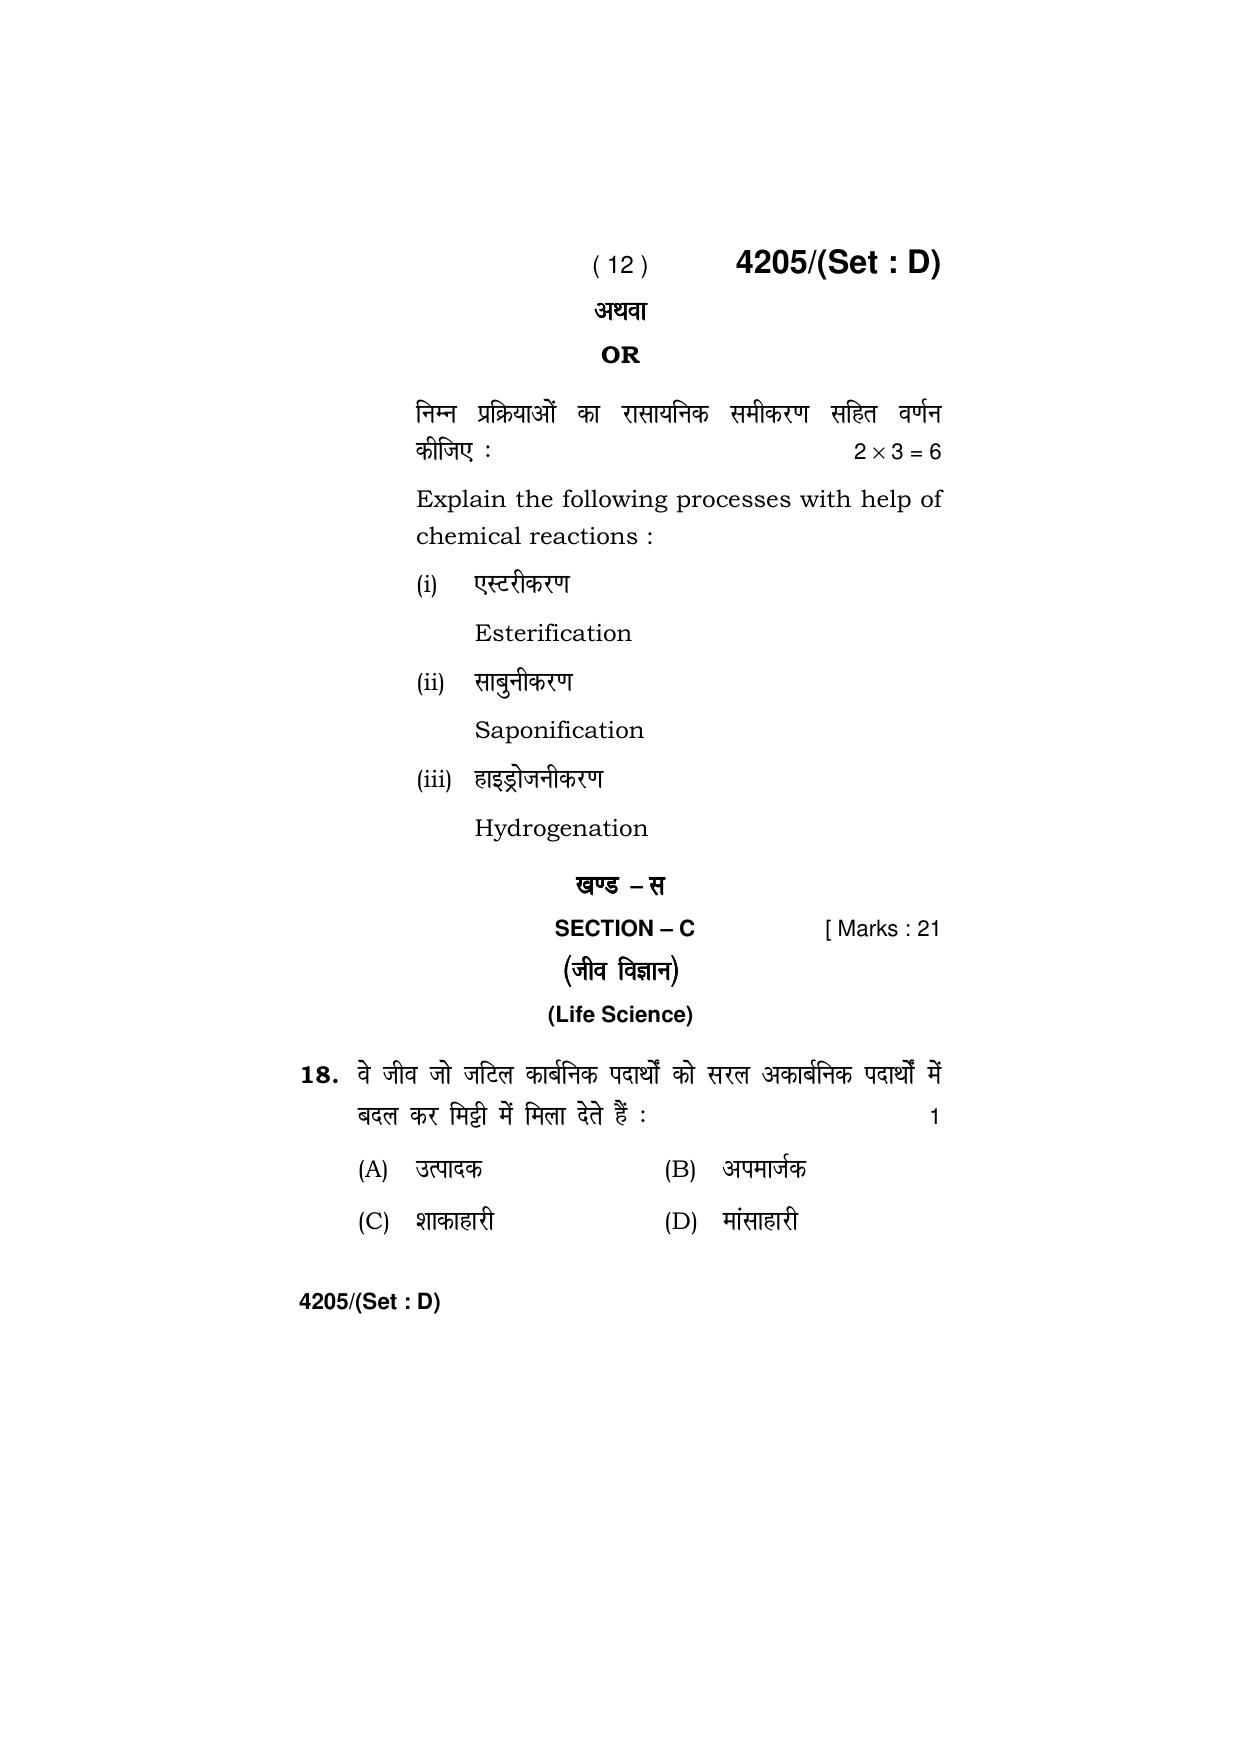 Haryana Board HBSE Class 10 Science (All Set) 2019 Question Paper - Page 60